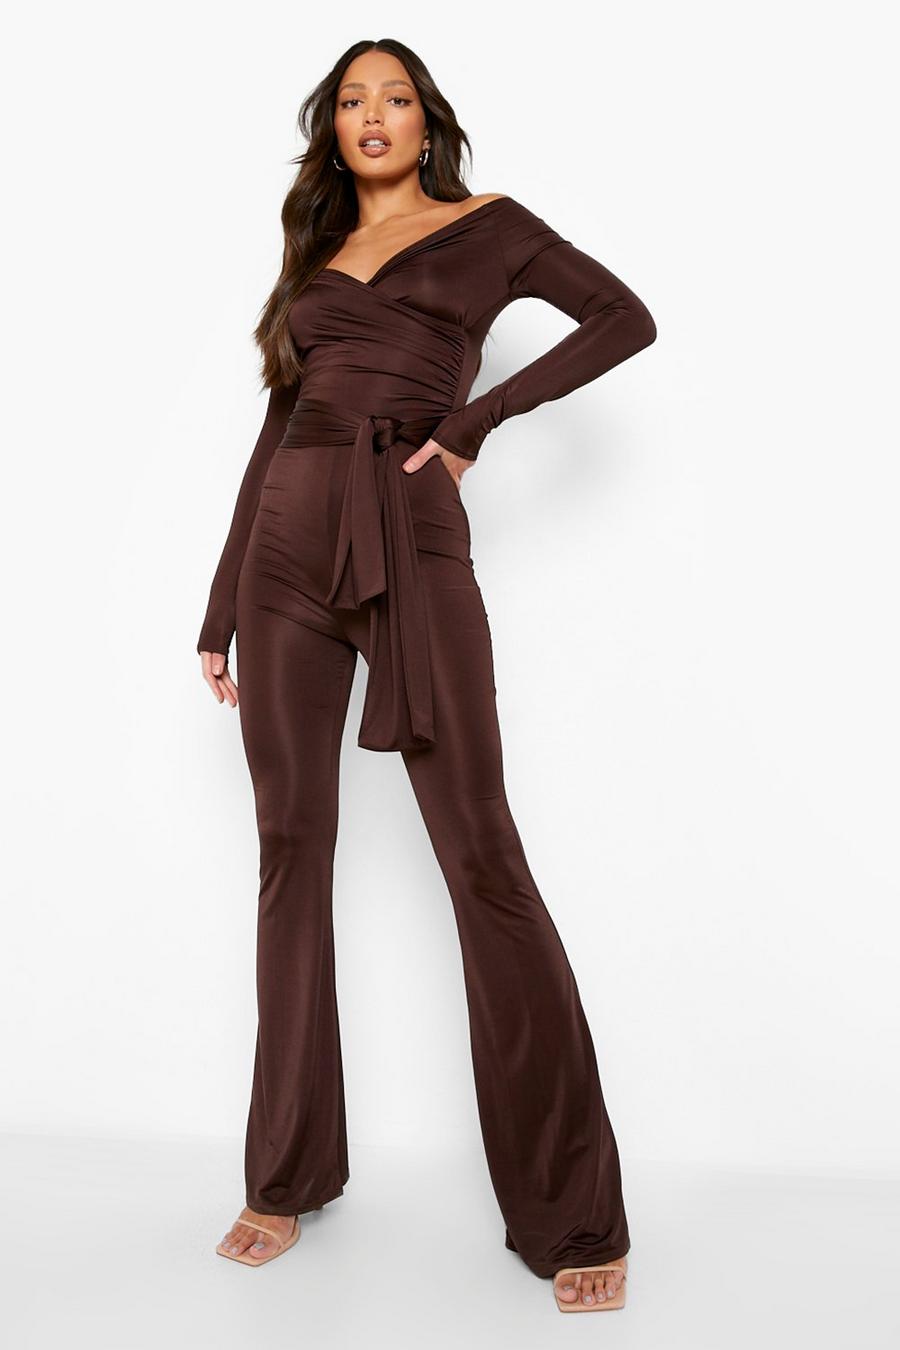 Chocolate brown Tall Off The Shoulder Slinky Jumpsuit